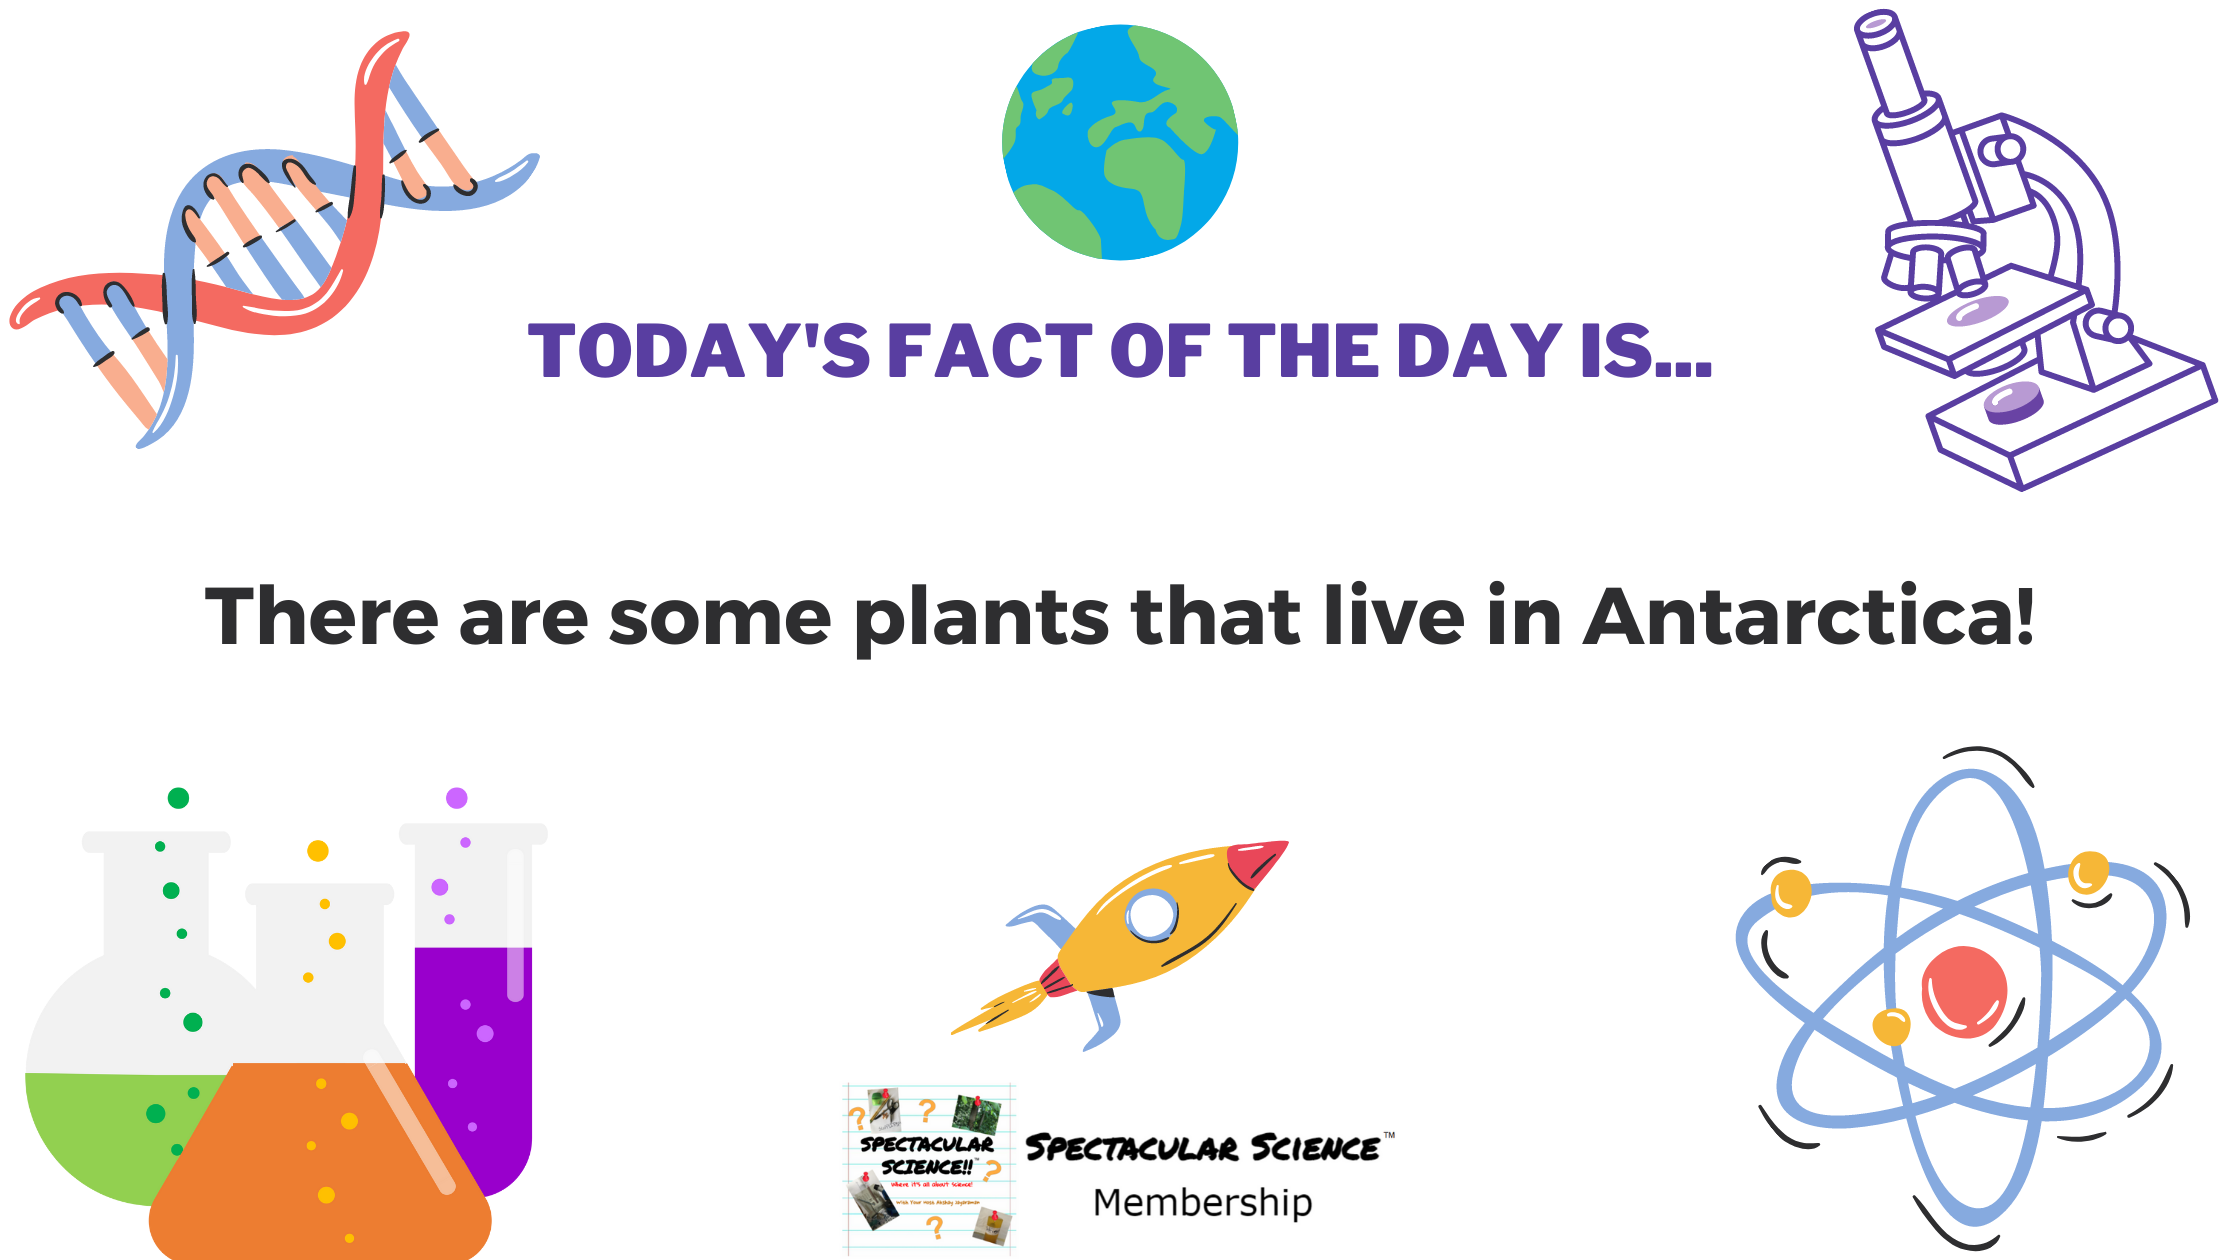 Fact of the Day Image May 21st